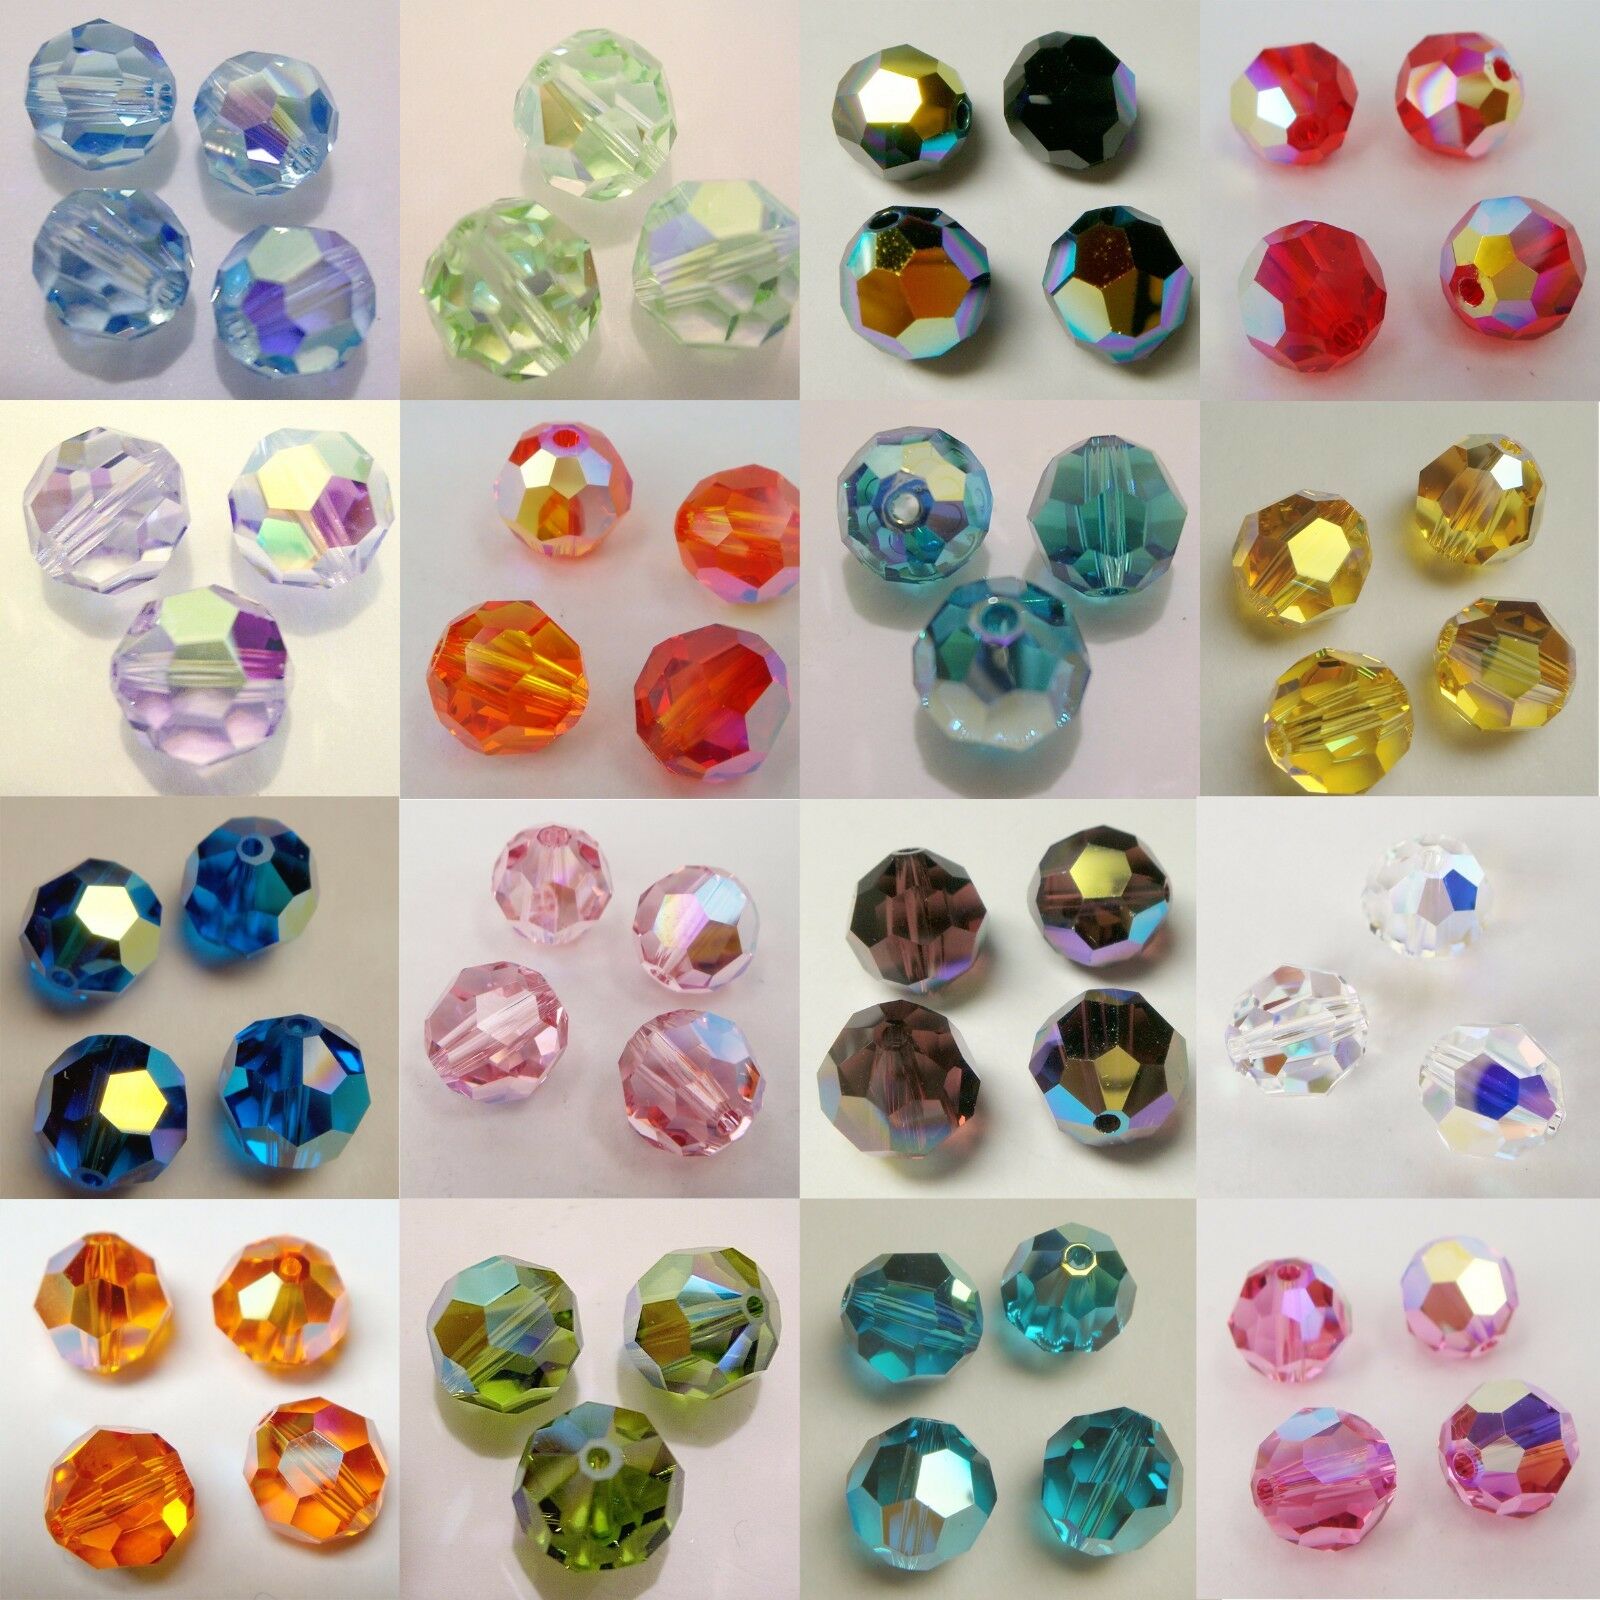 Swarovski Crystal Element 5000 10mm Faceted Round Bead   Ab Variable Color  #1